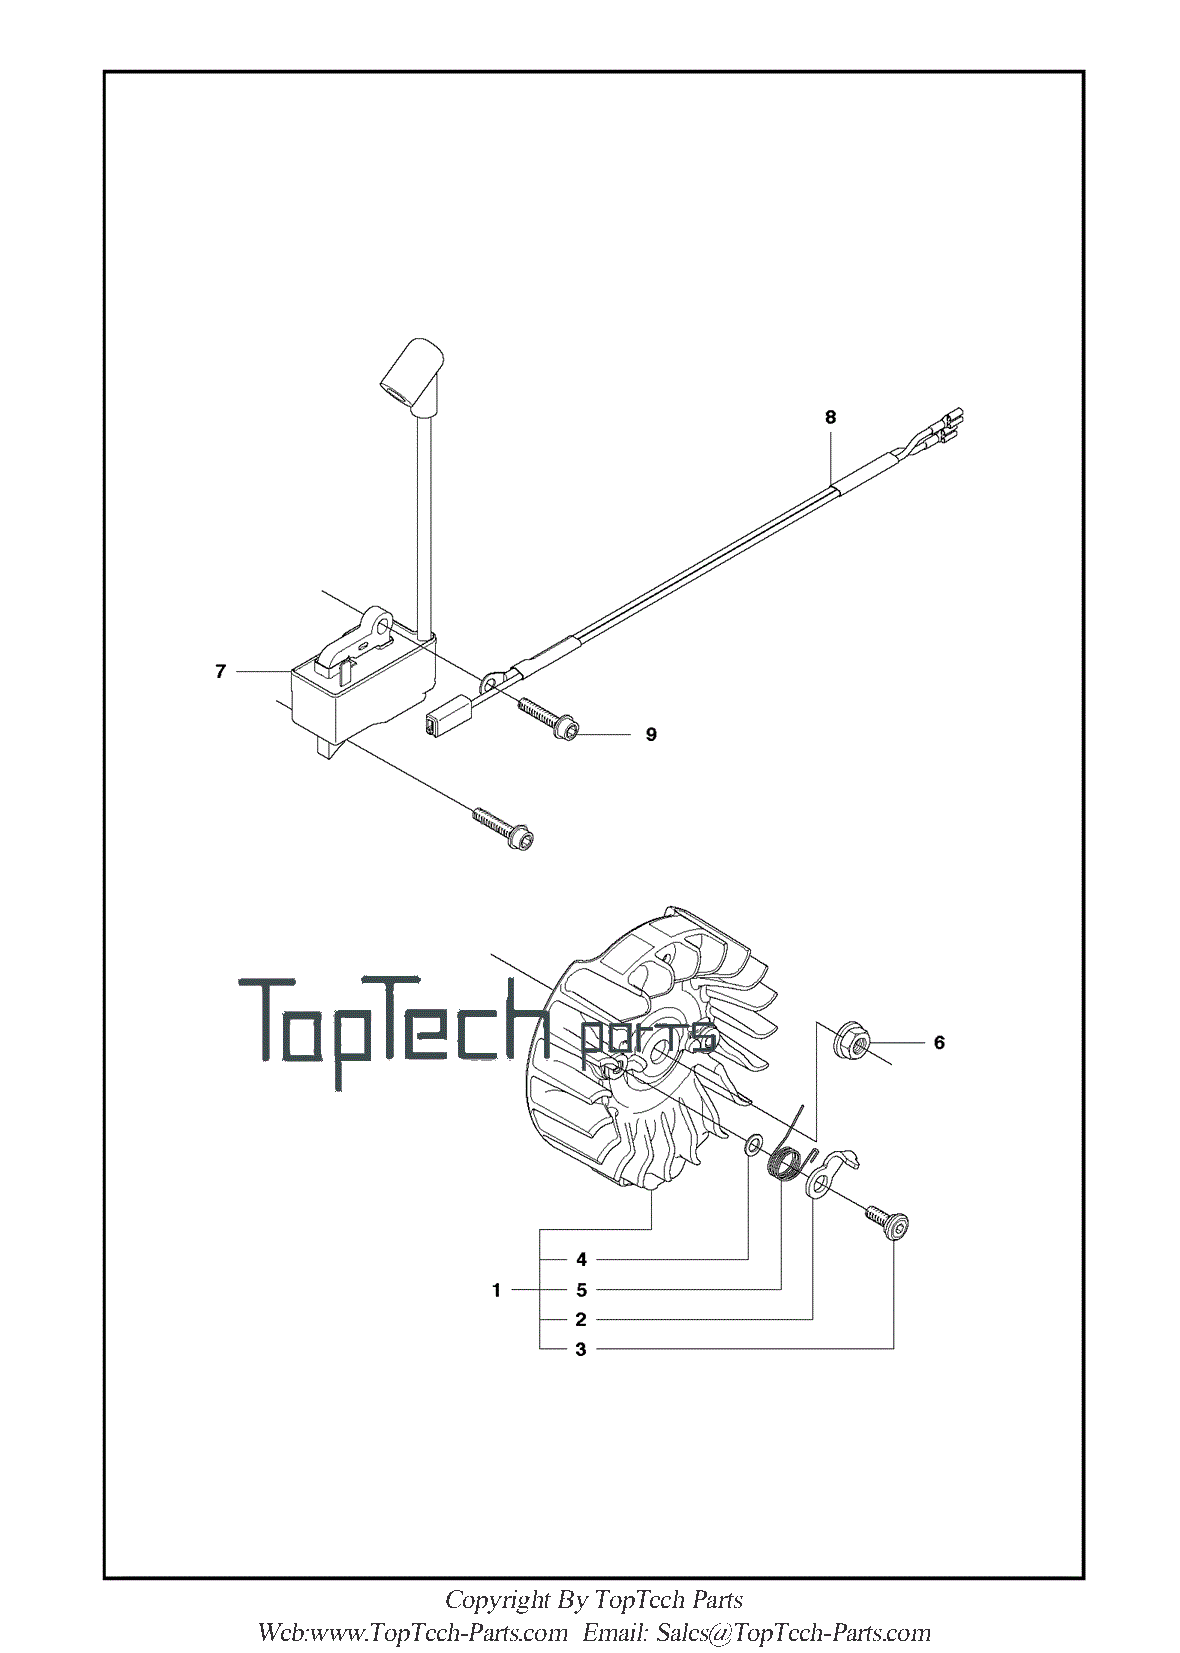 Ignition system assy